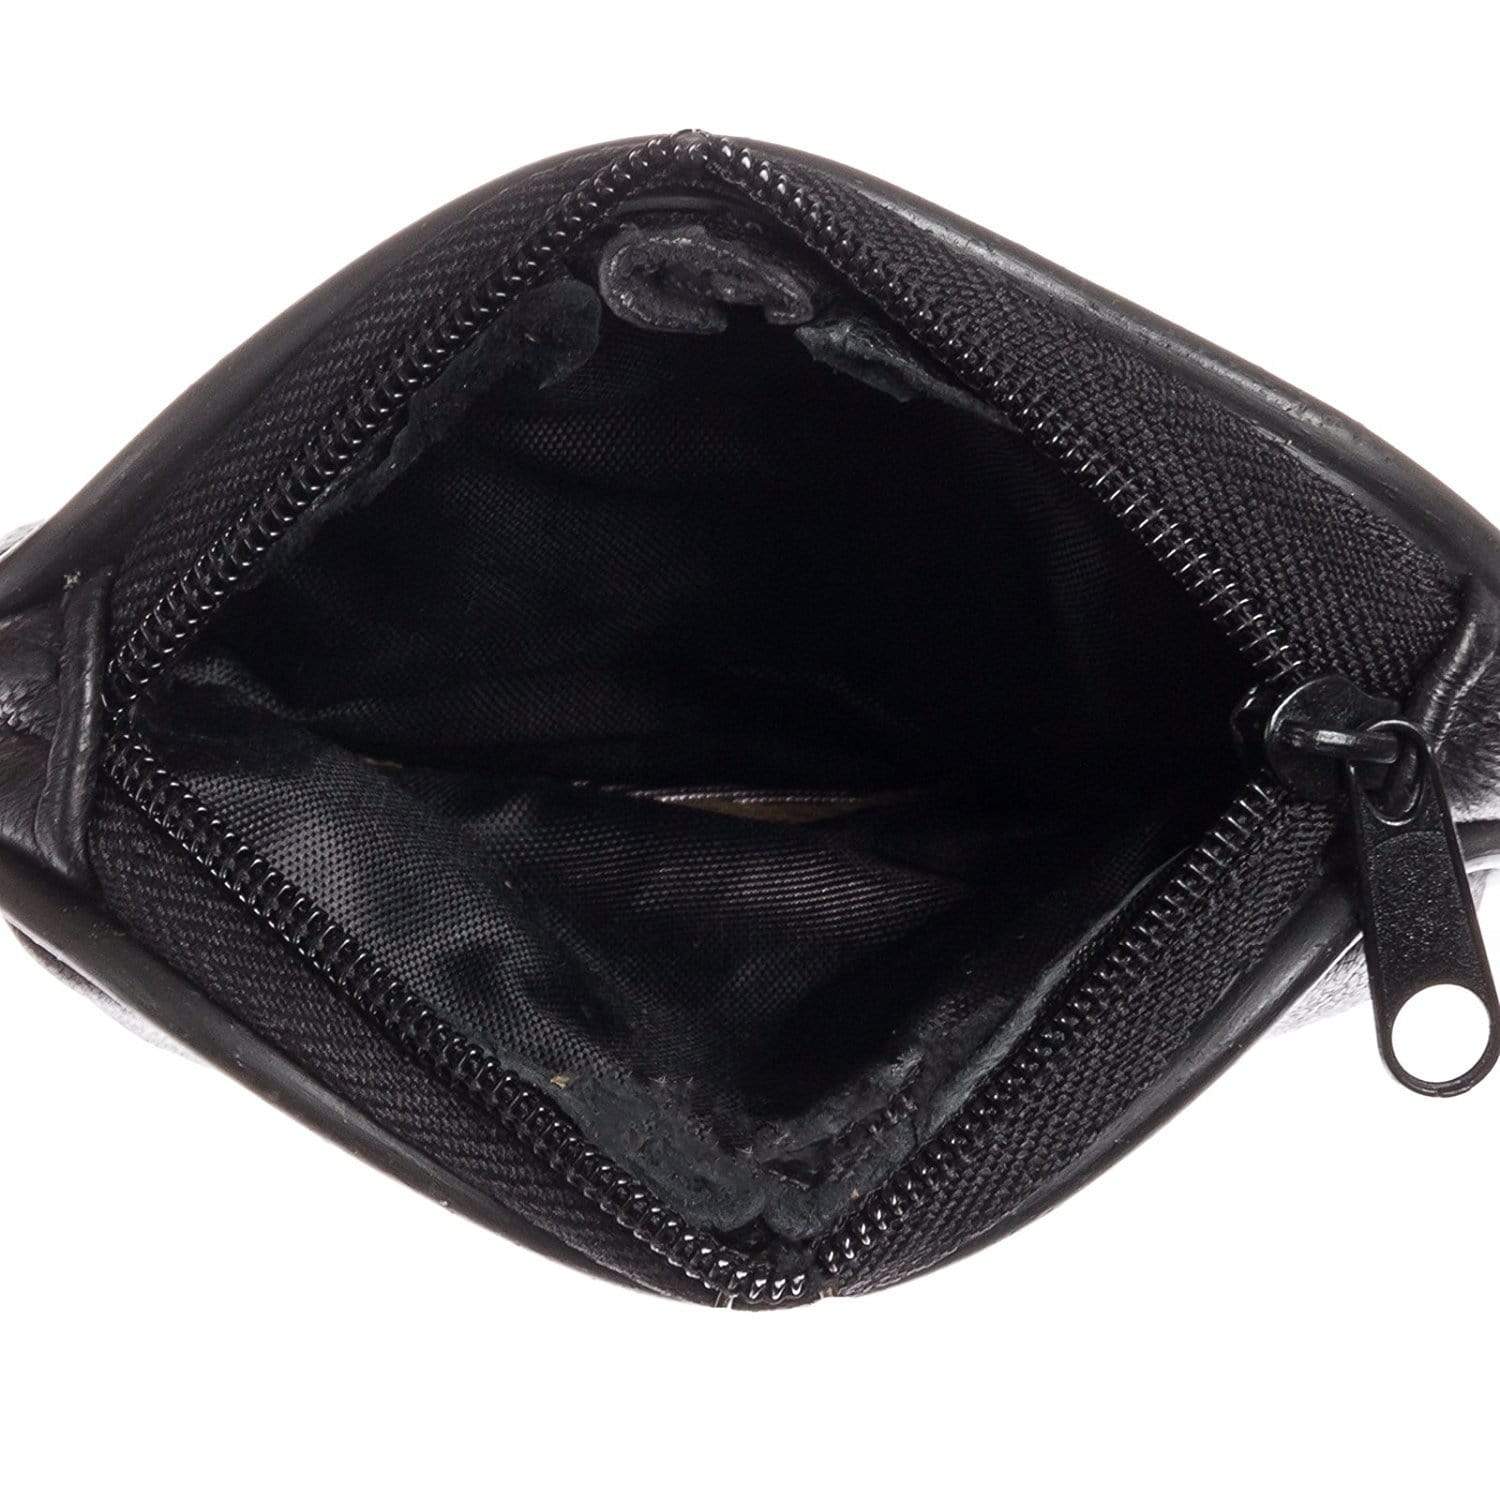 Leather black coin purse 2 snap 2 zippered pockets change purse leather coin  bag leather coin pouch leather coin holder